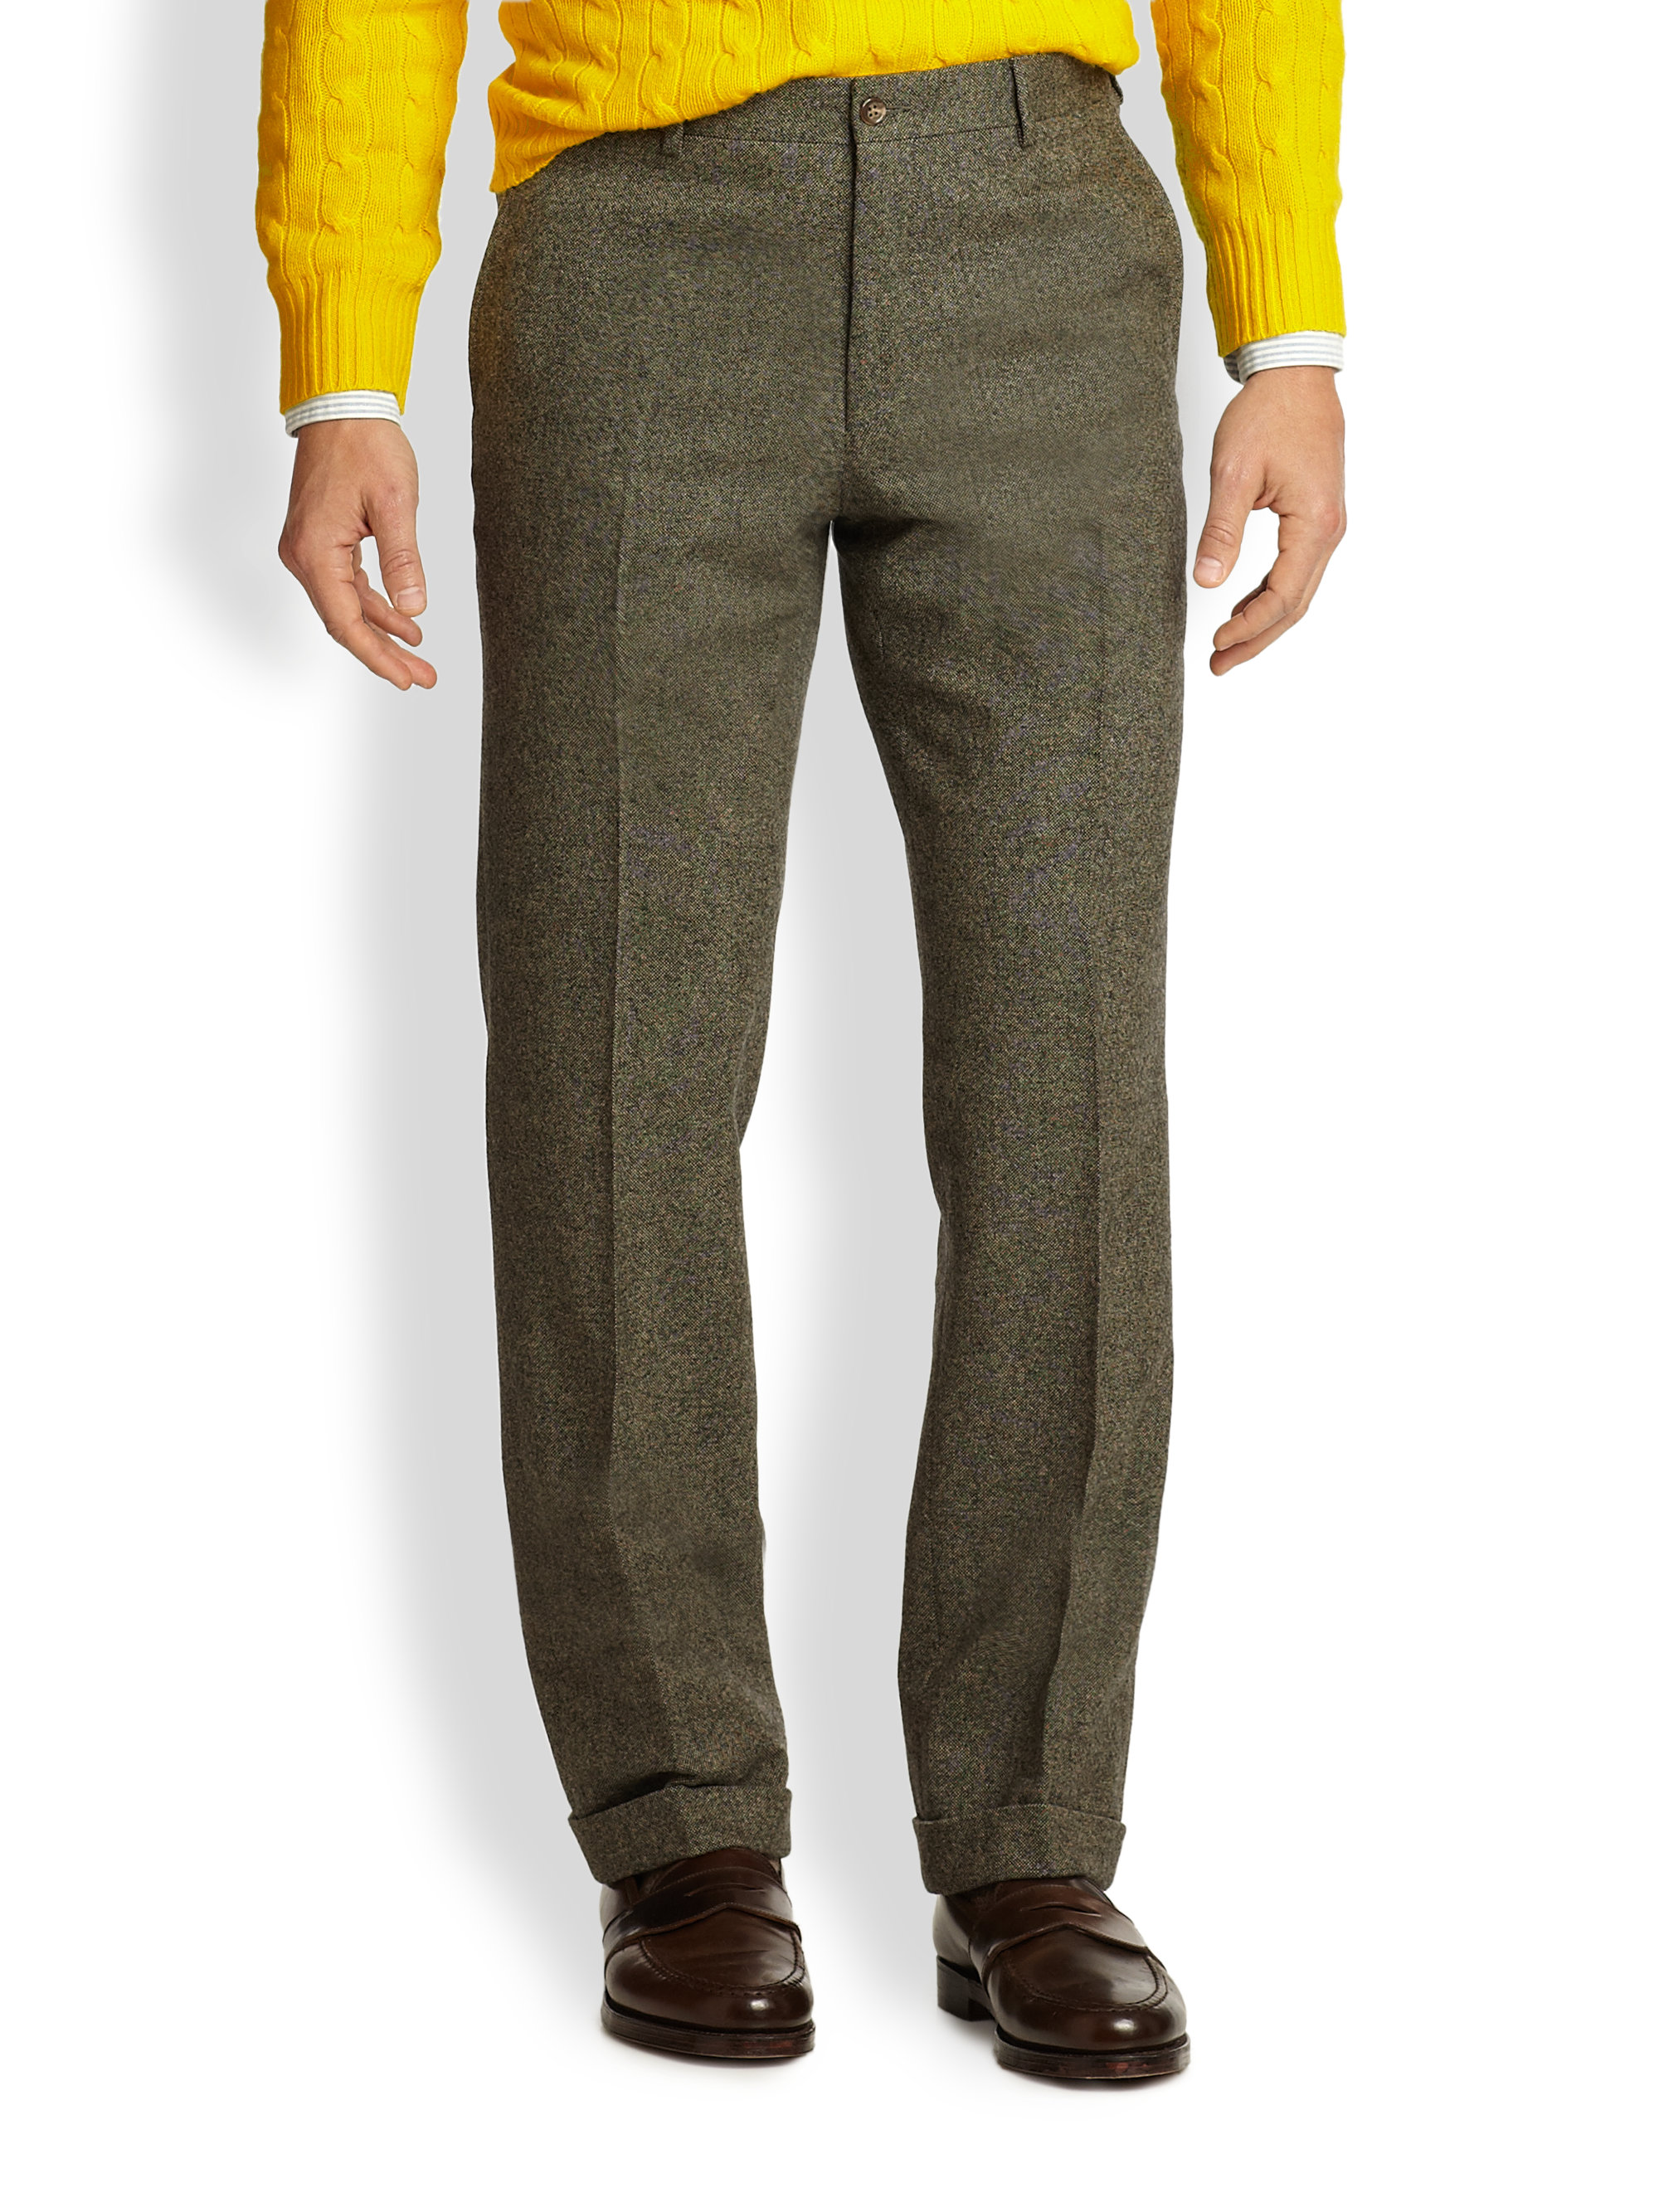 Polo Ralph Lauren Donegal Wool Trousers in Charcoal (Gray) for Men - Lyst